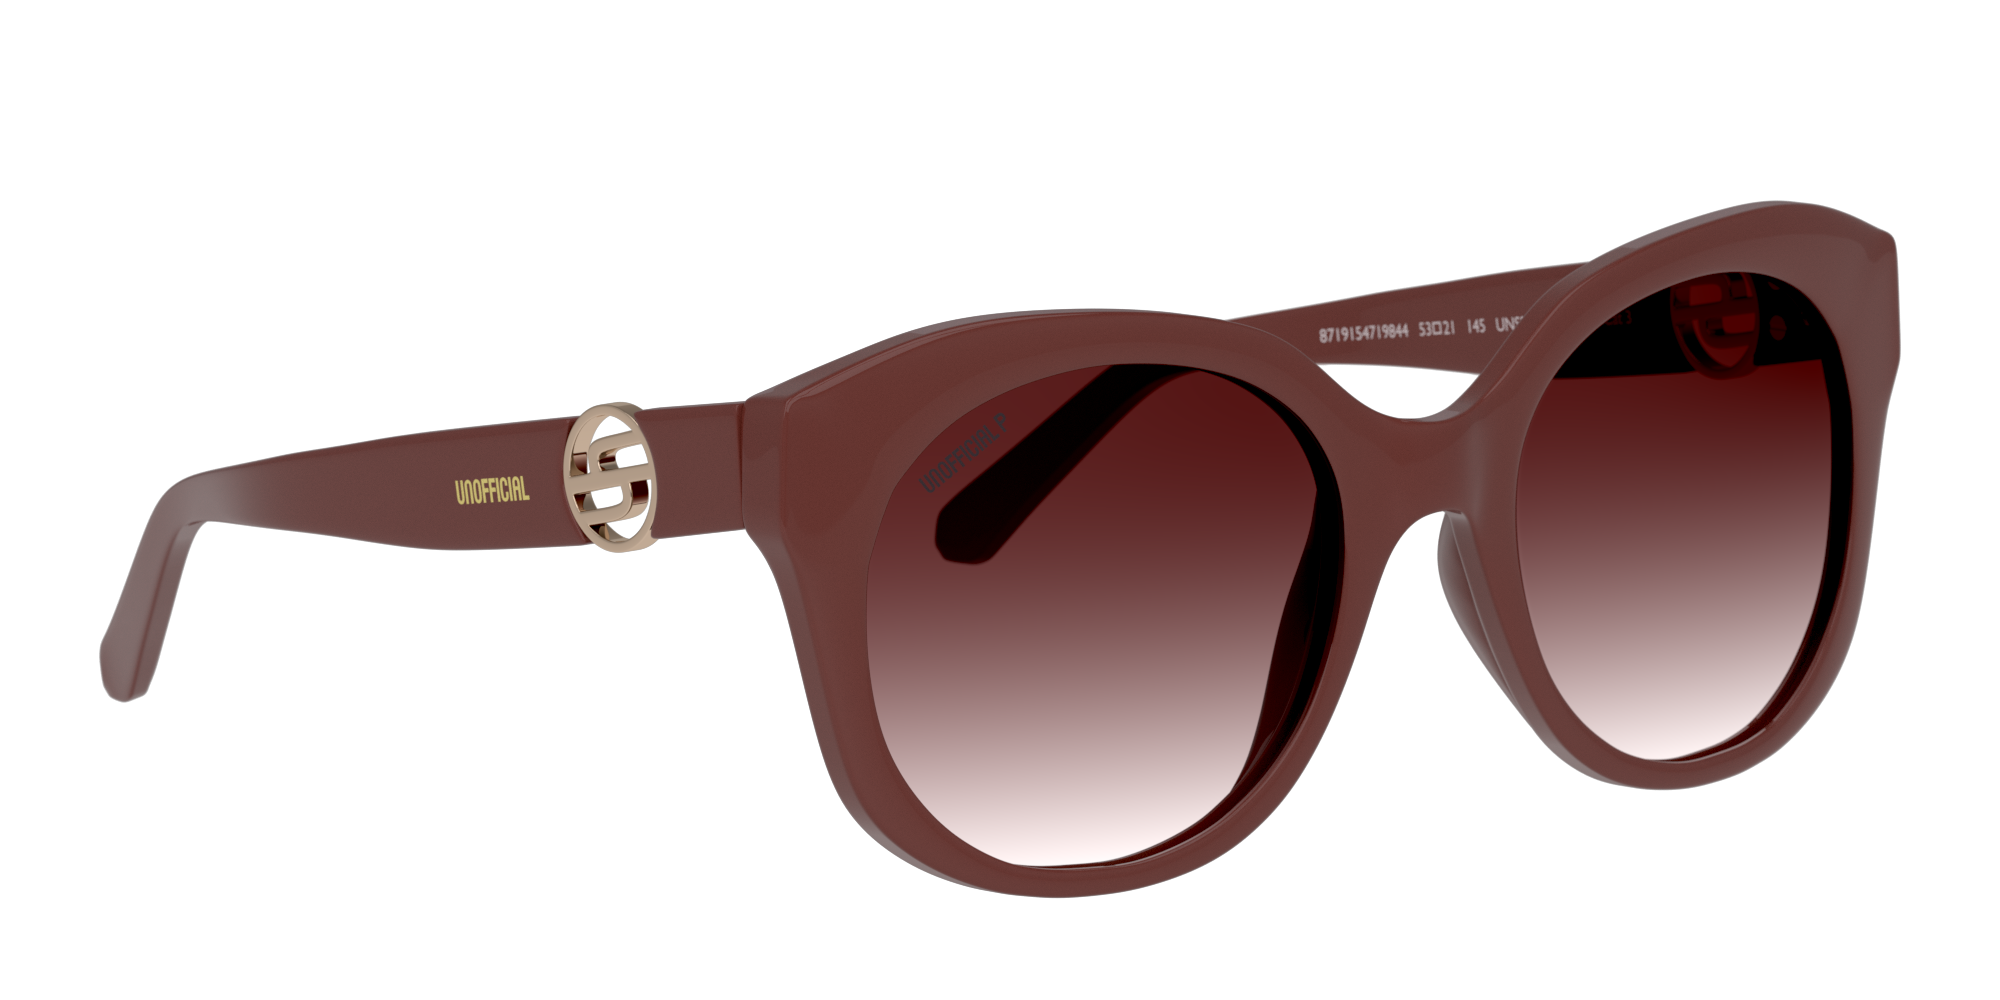 Angle_Right01 Unofficial UNSF0203P Sunglasses Brown / Red